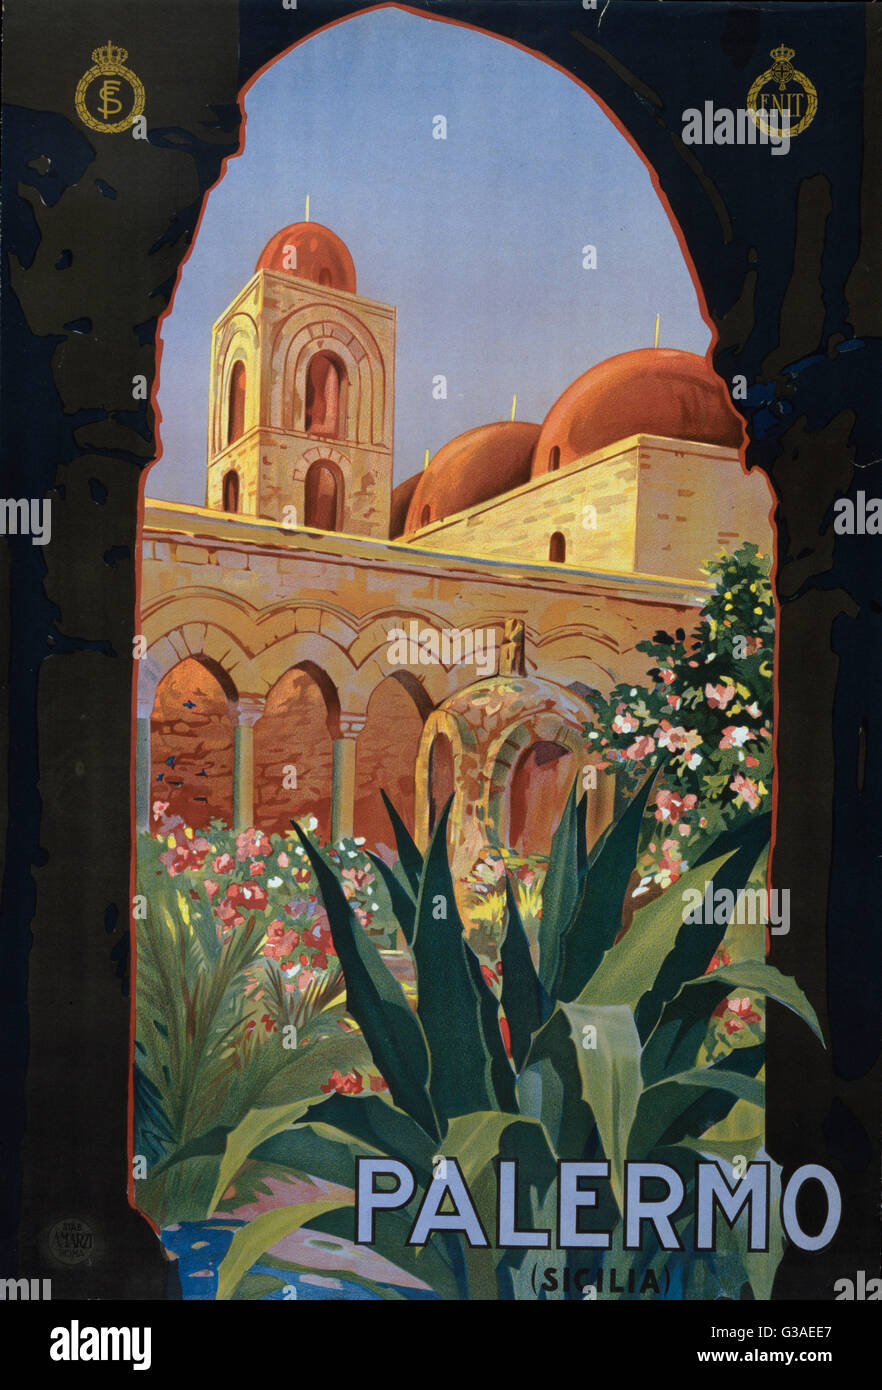 Palermo (Sicilia). Poster showing a garden courtyard with arcade and tower. Date ca. 1920. Stock Photo